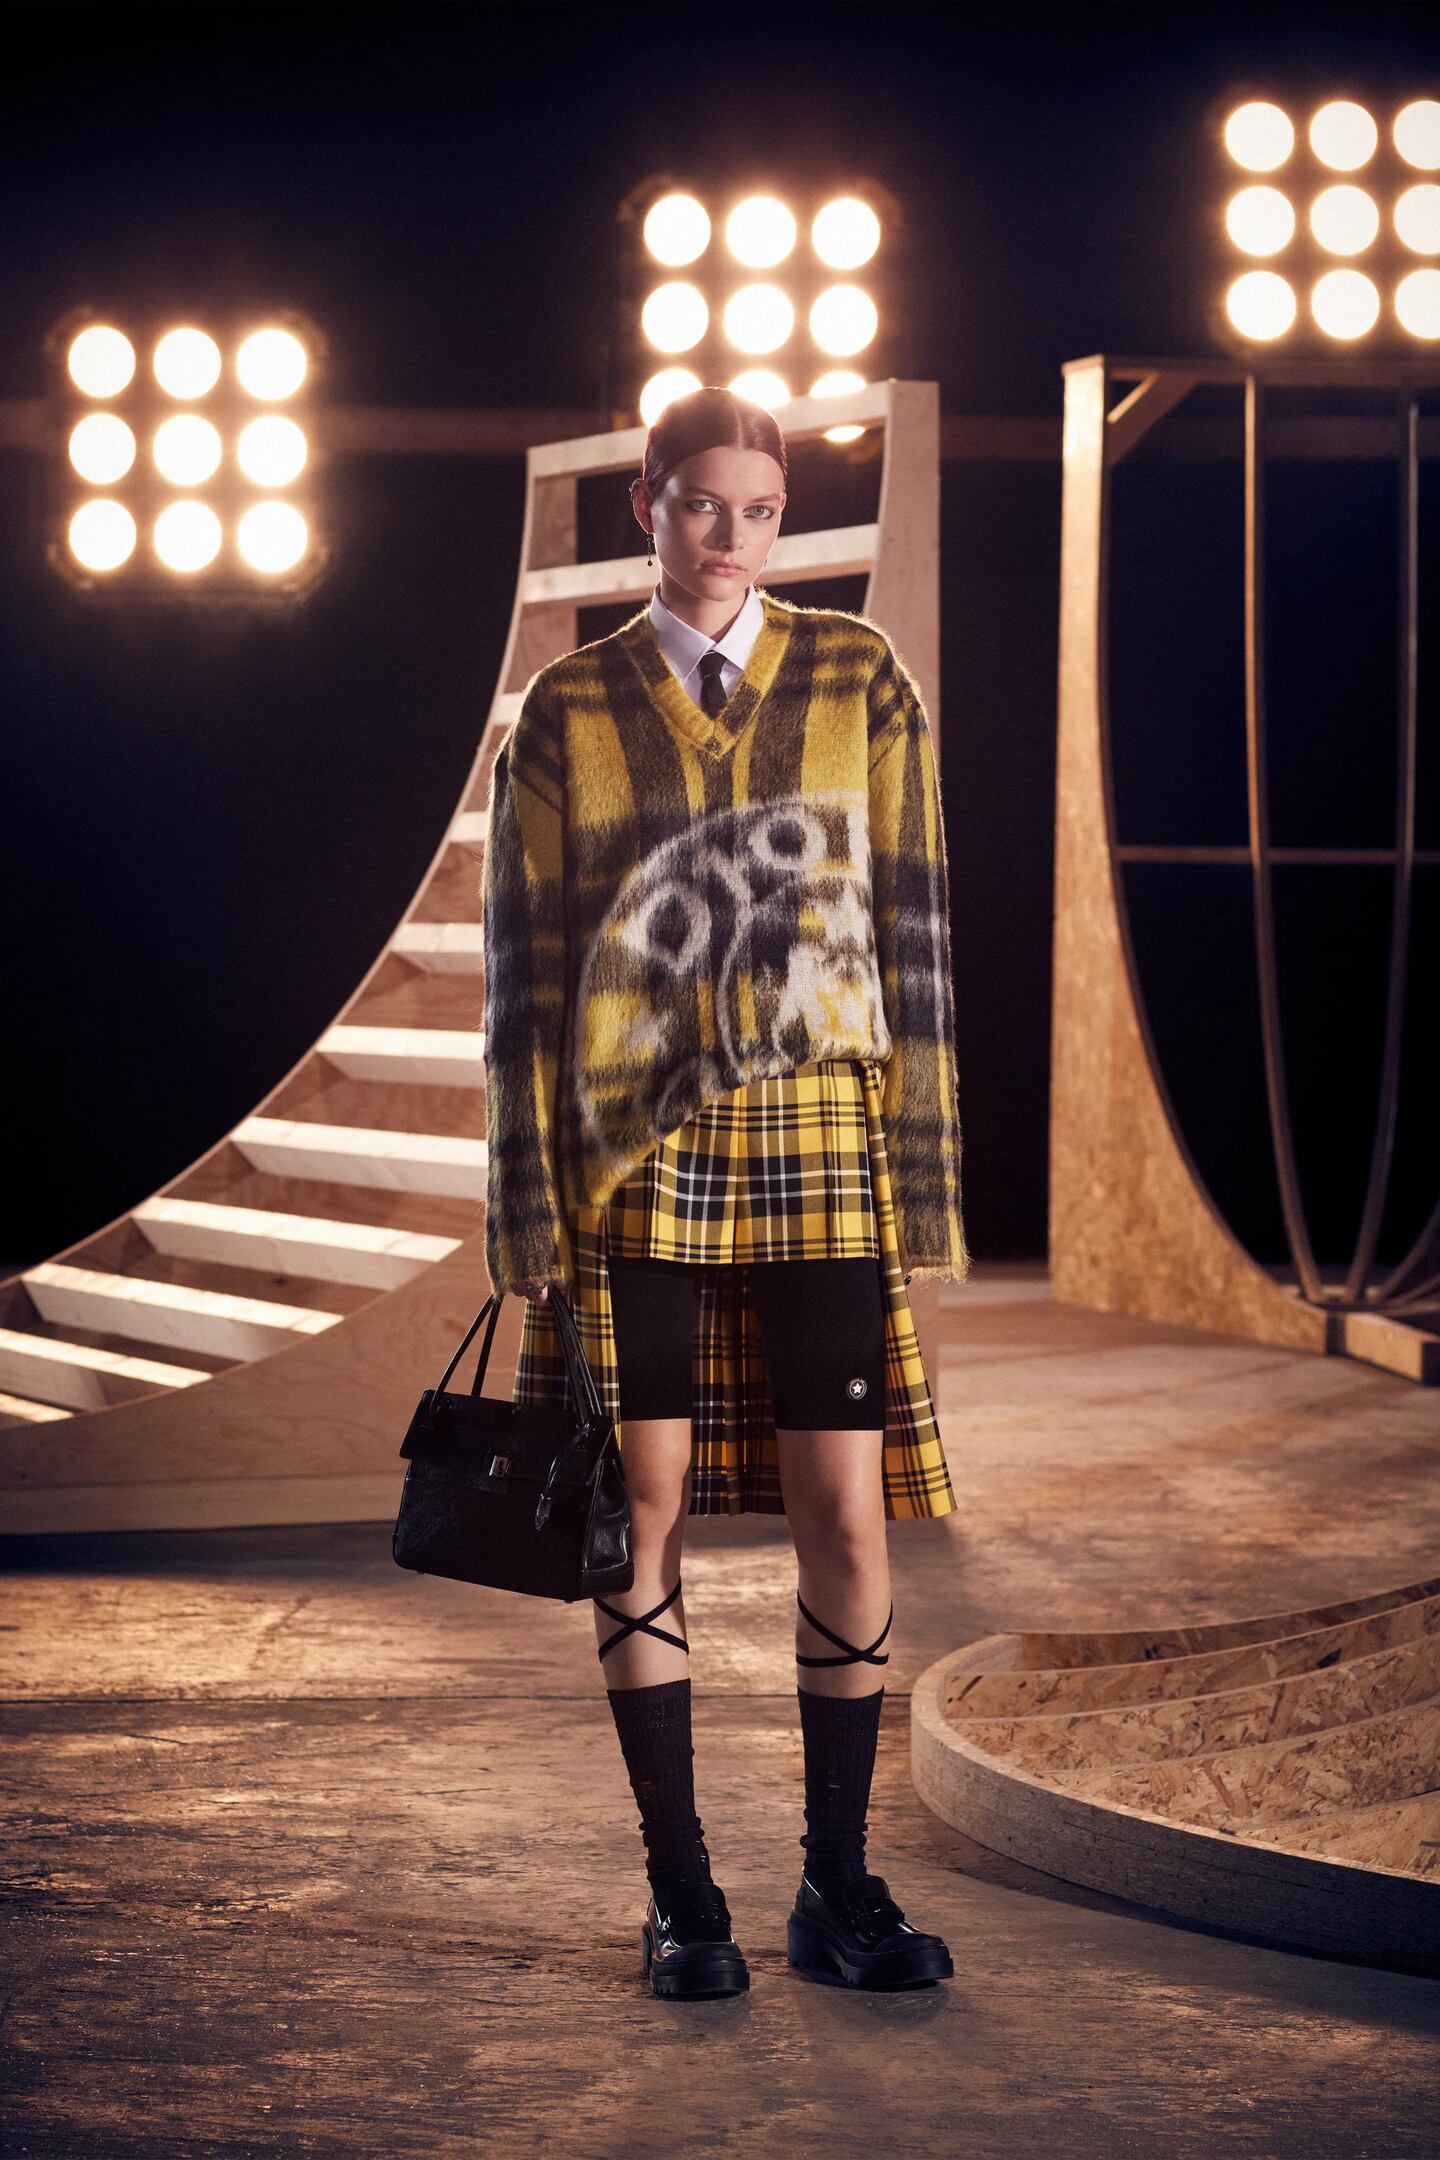 A look from Dior's pre-fall 2022 collection, which will show on the runway in Seoul on April 30.